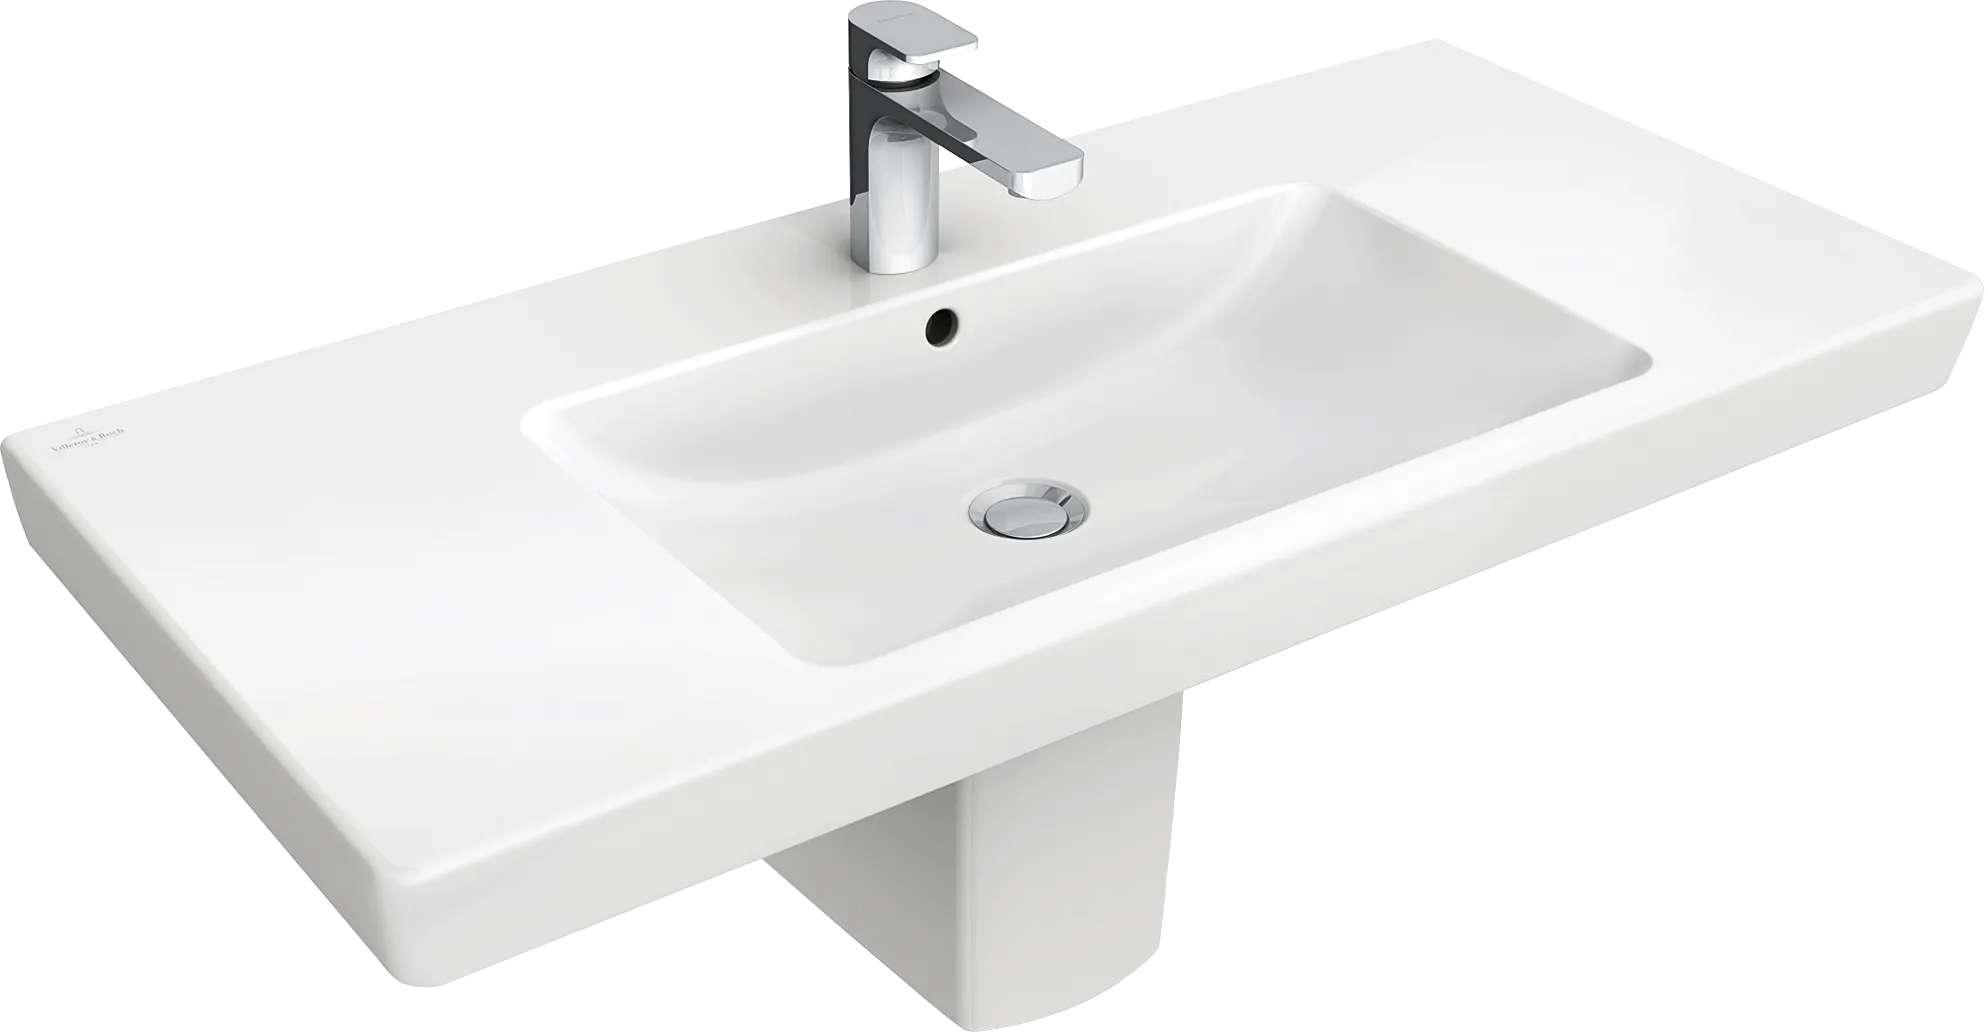 Picture of VILLEROY BOCH Subway 2.0 Vanity washbasin, 1000 x 480 x 180 mm, White Alpin, with overflow #7175A001